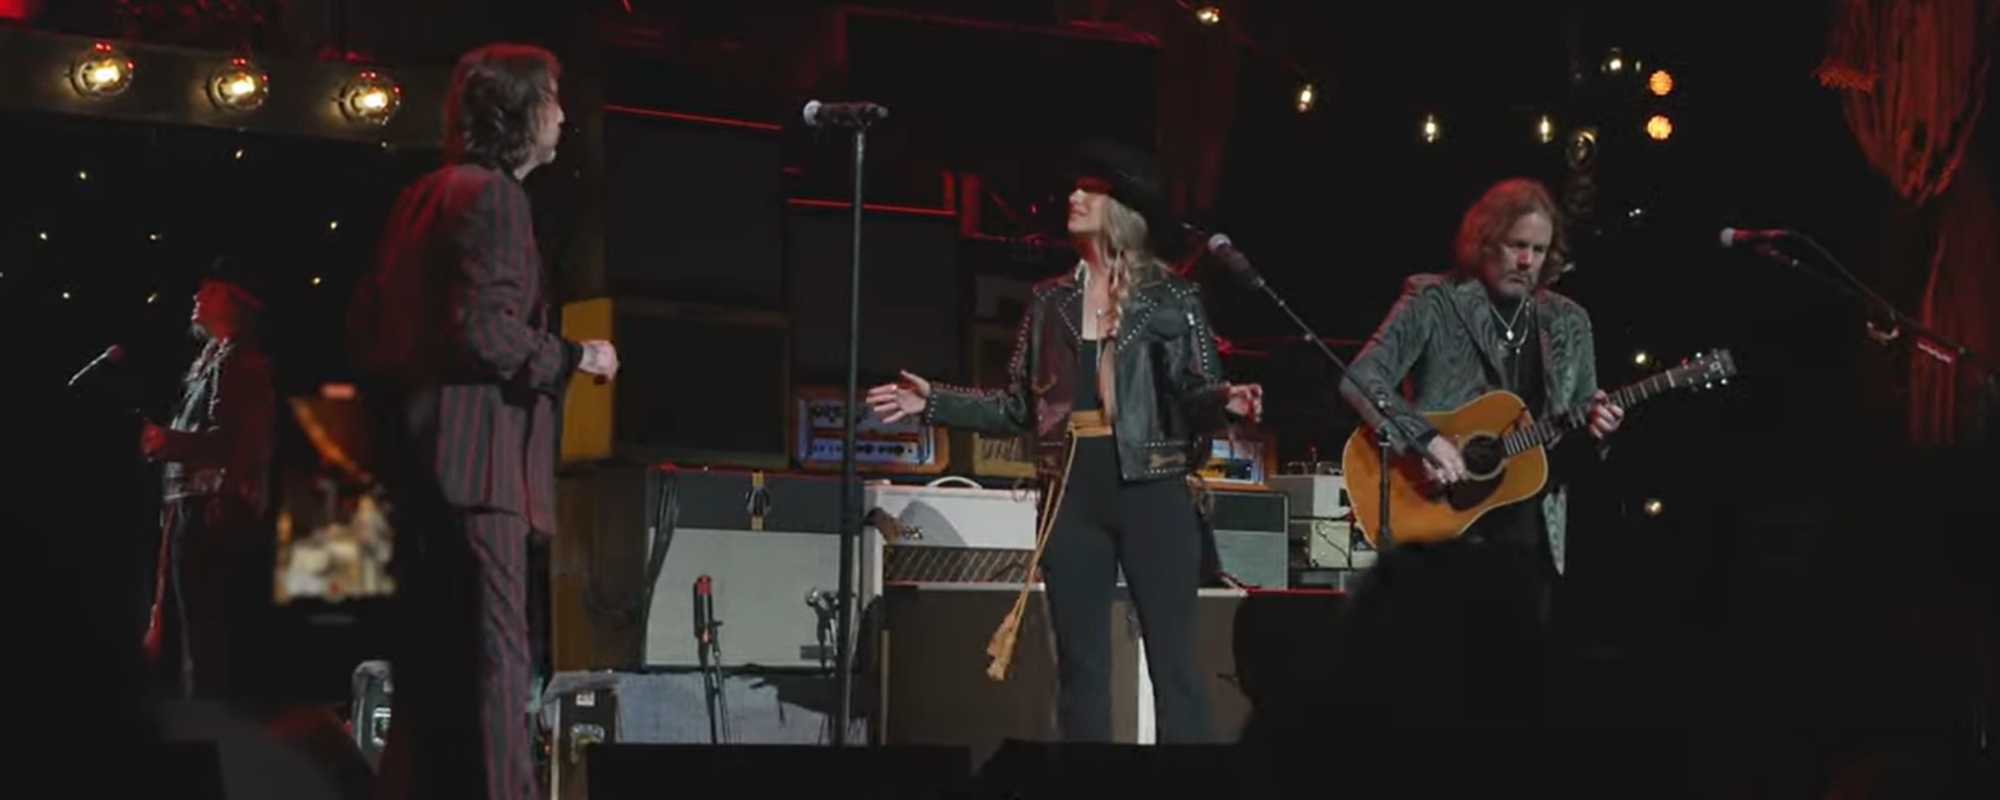 The Black Crowes Release Video for Lainey Wilson Collaboration “Wilted Rose”